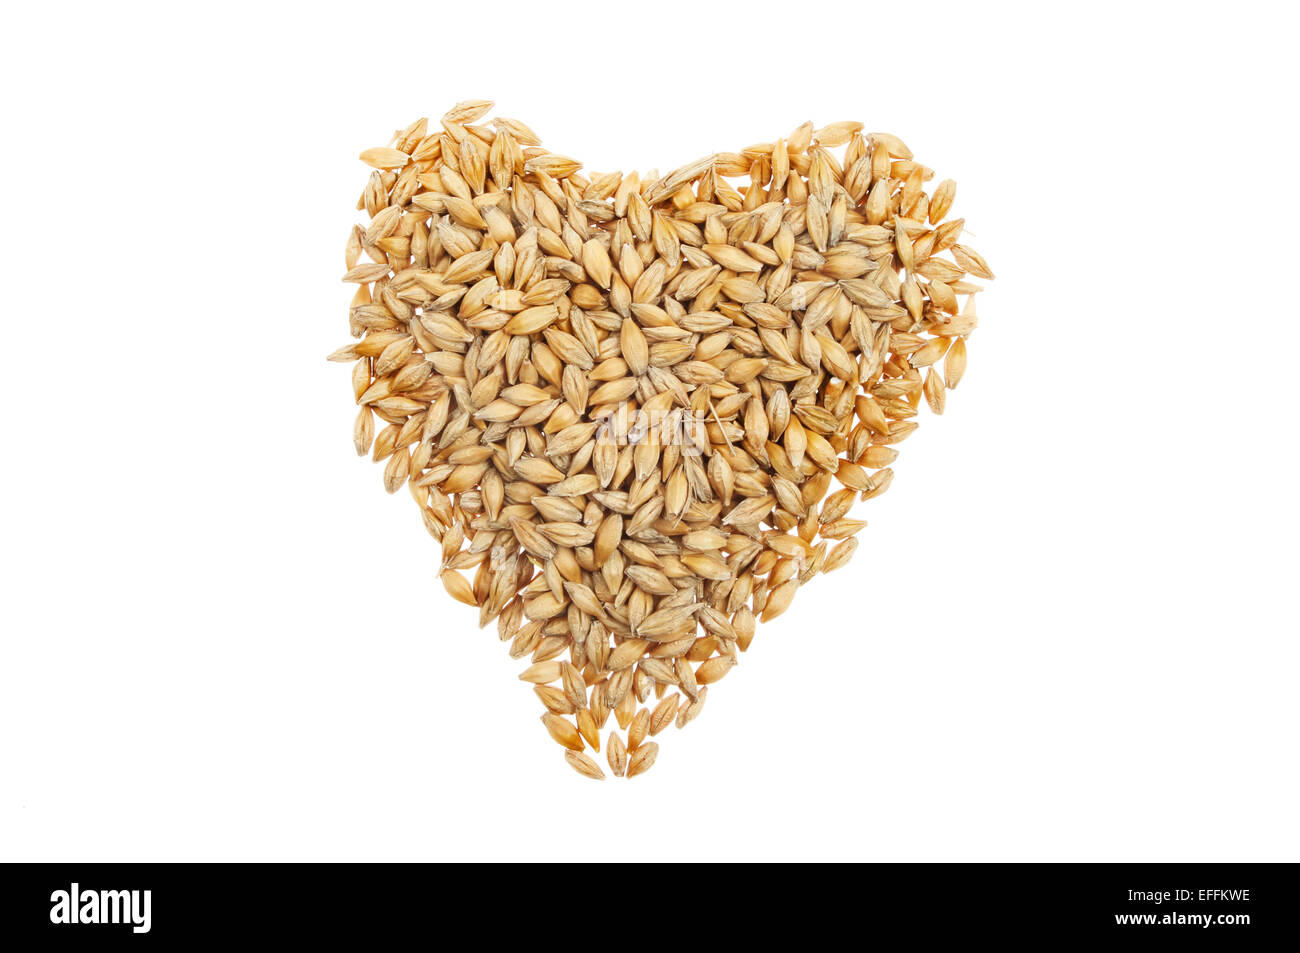 Grains of wheat in a heart shape isolated against white Stock Photo